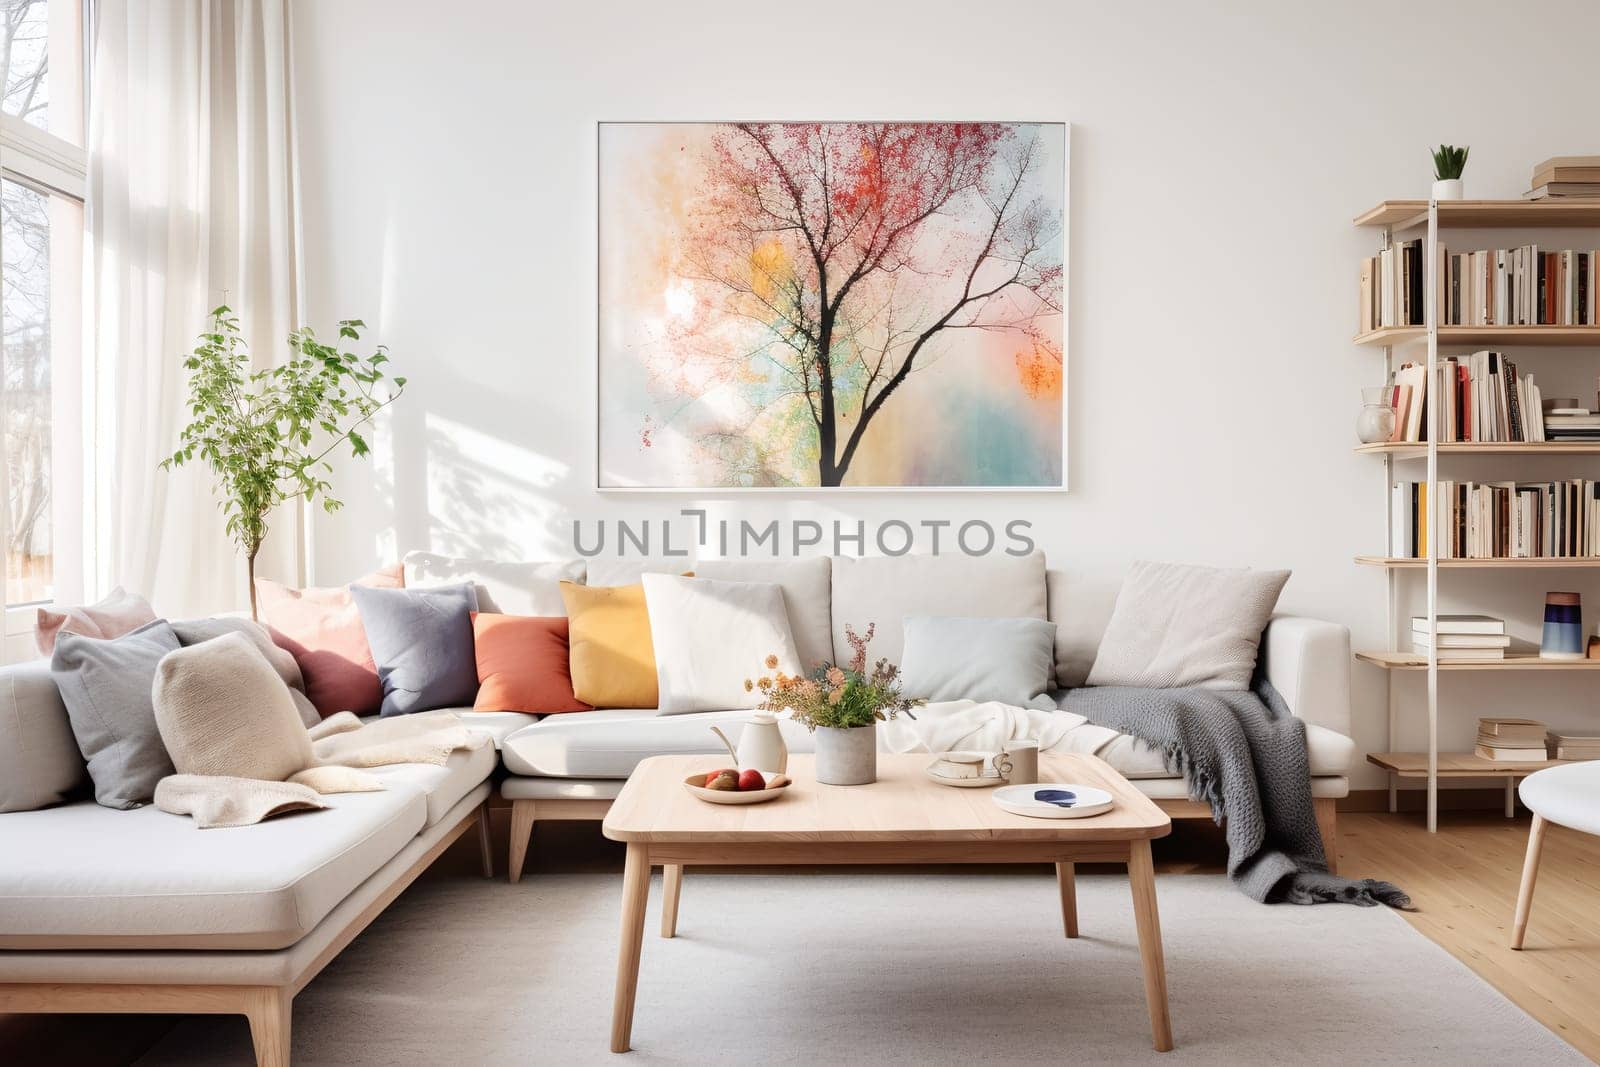 Modern Living Room With Natural Light and Cozy Decor by chrisroll